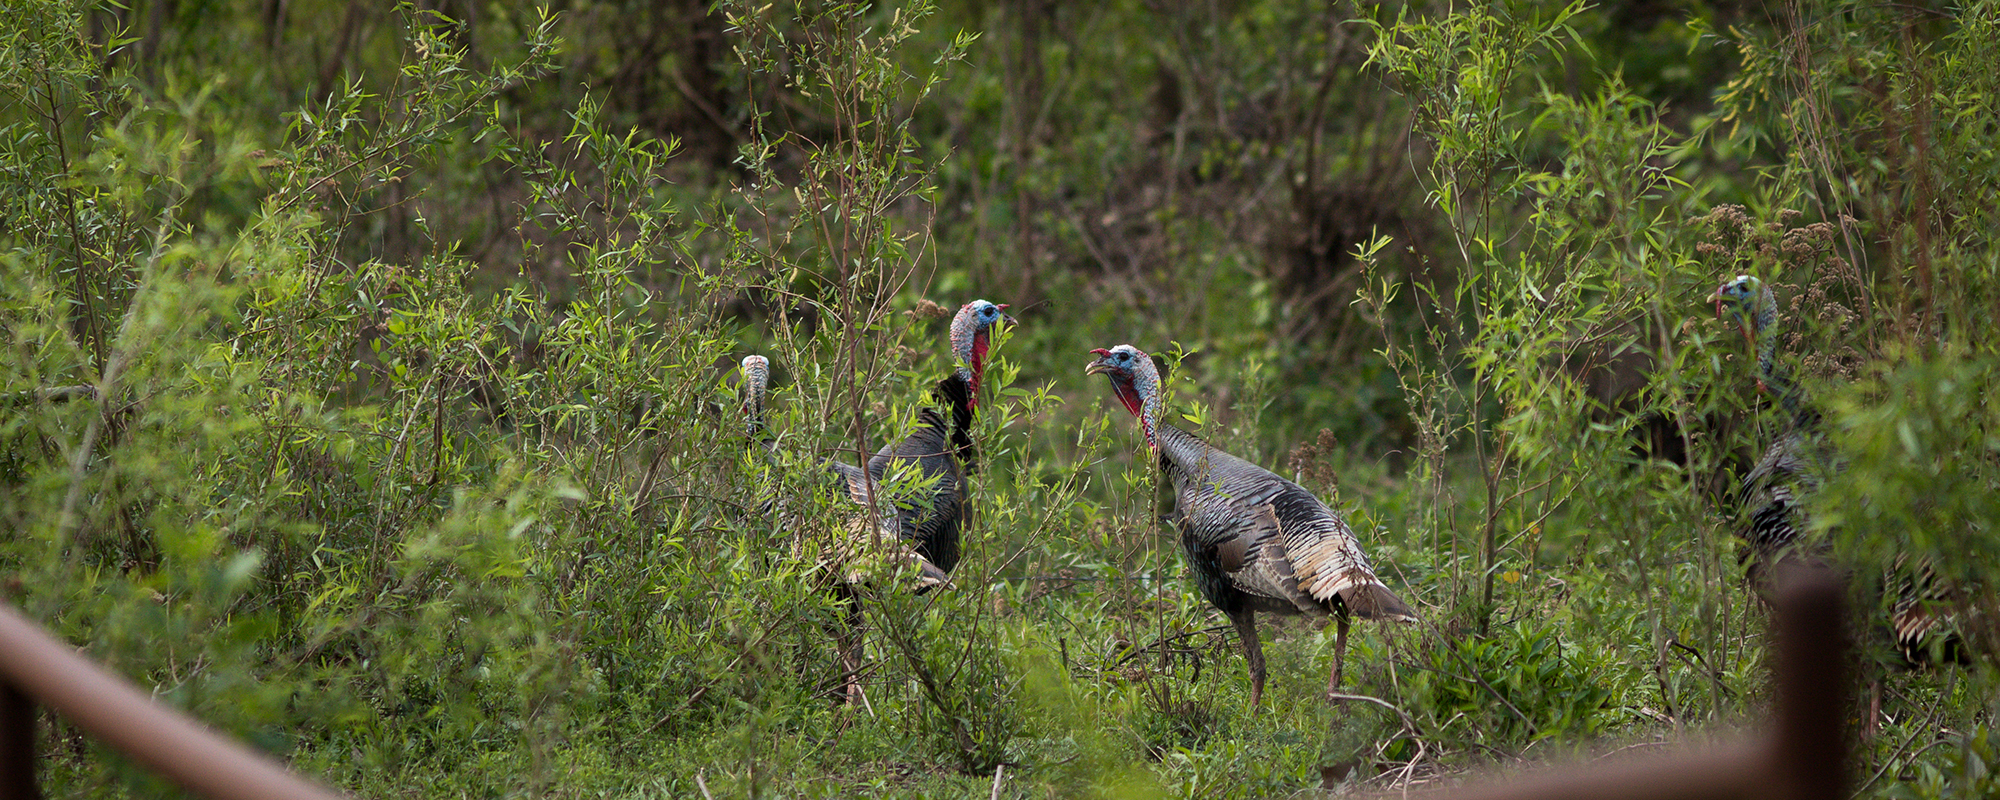 Do what you can for wild turkey habitat with your ranch management choices